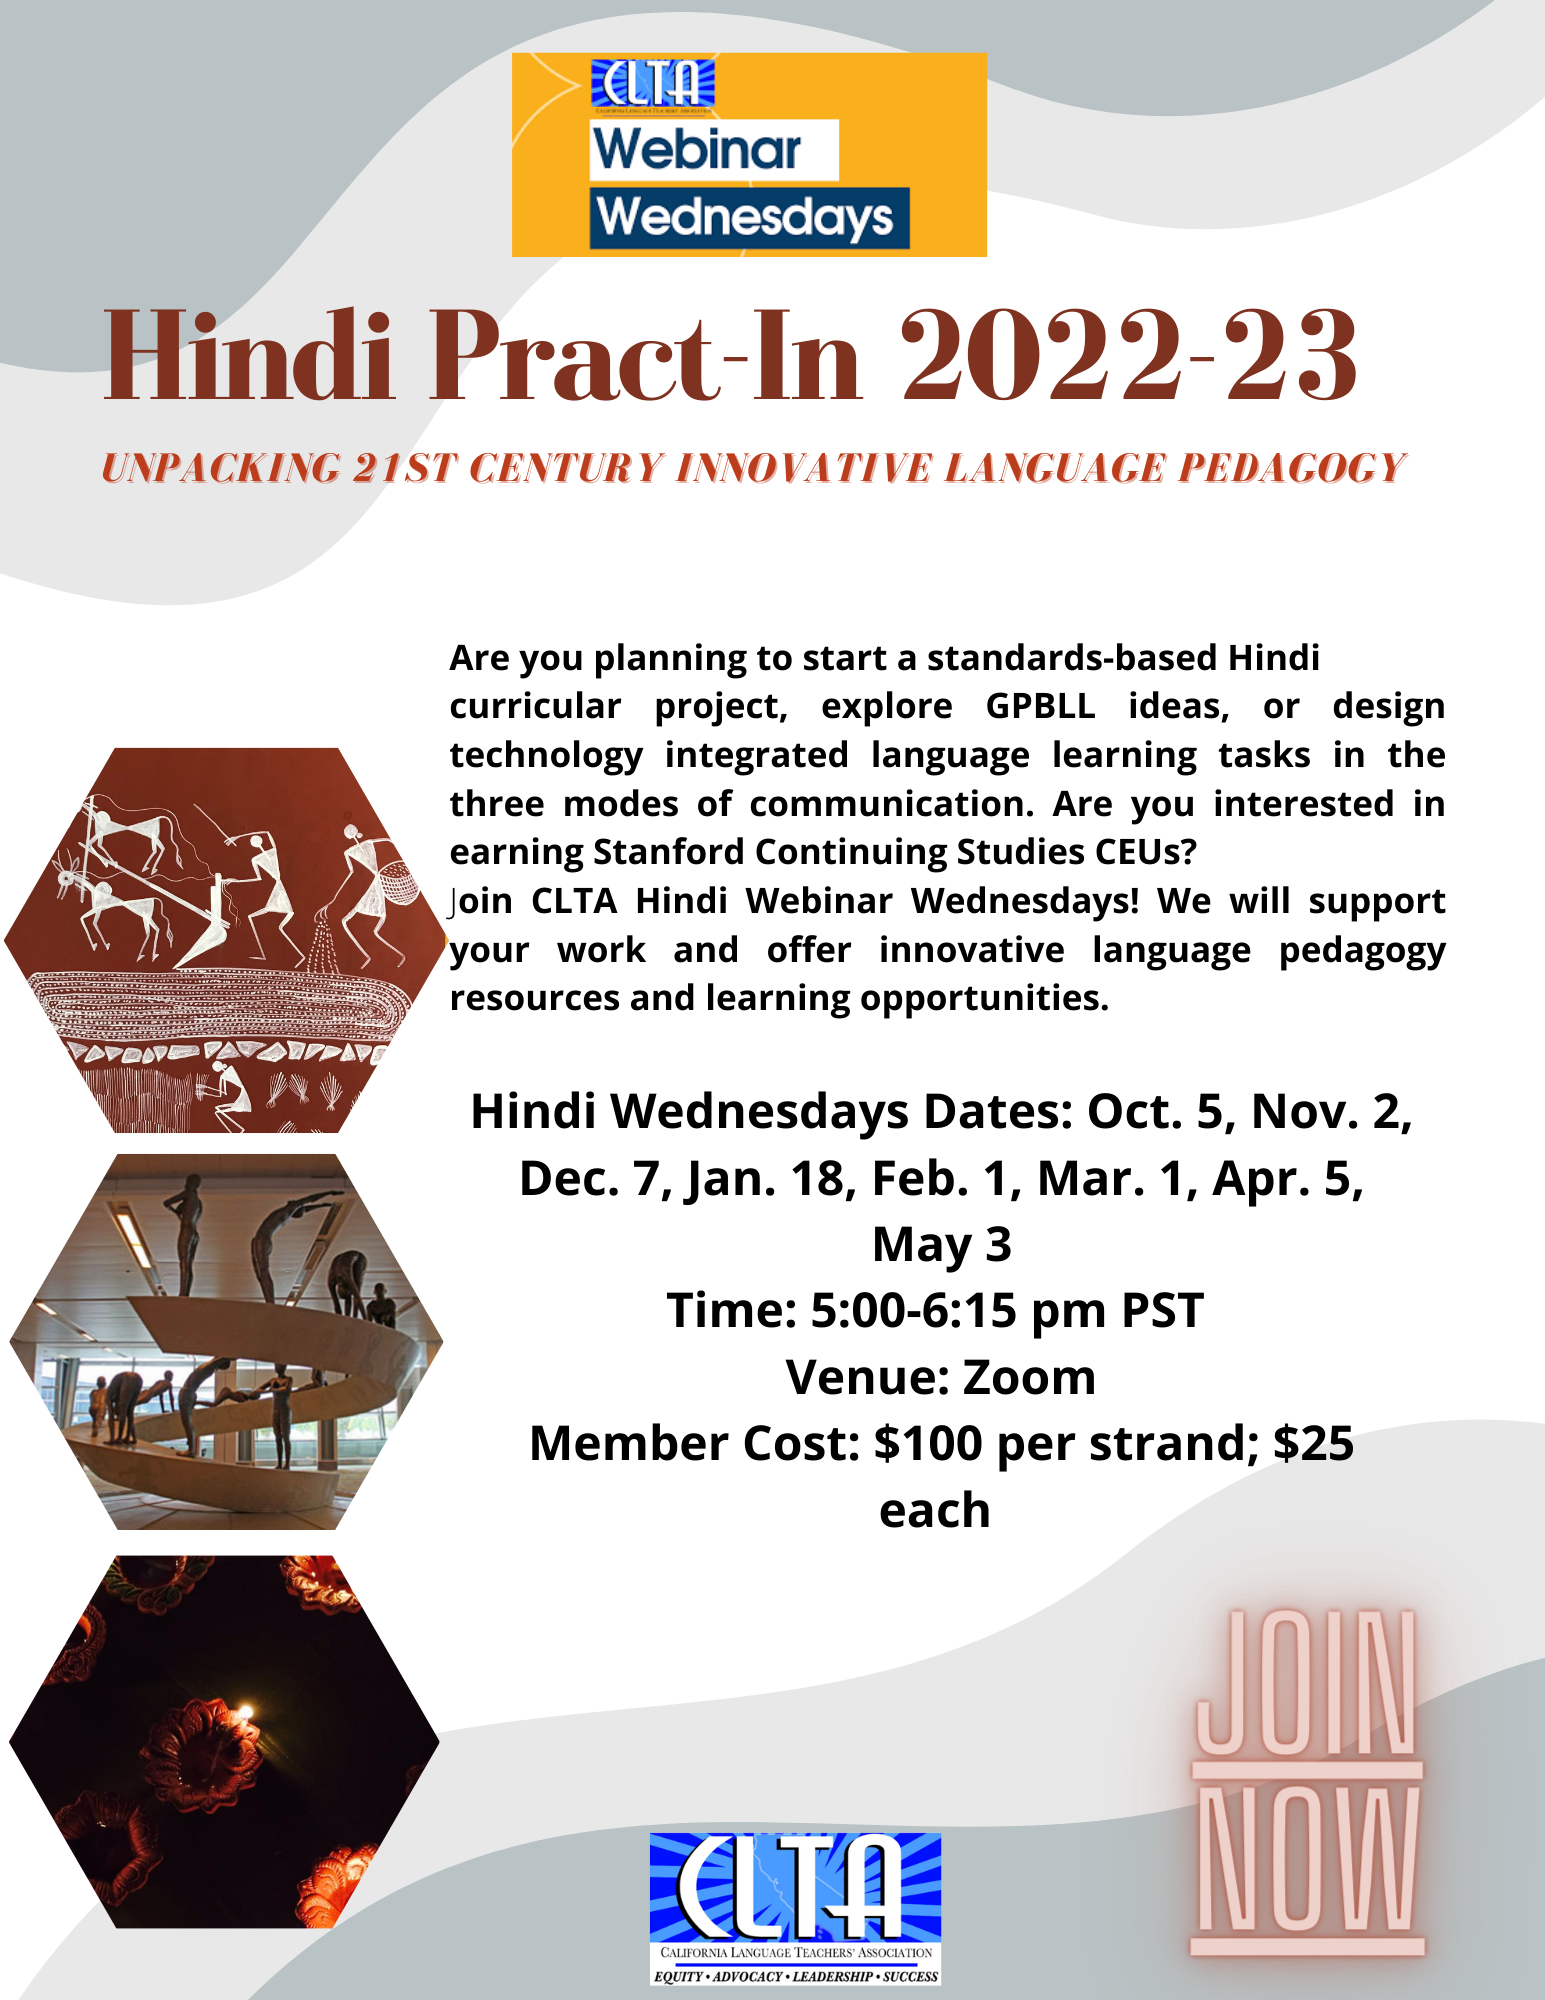 Pract-In’s – Hindi Wednesdays – March 1, 2023